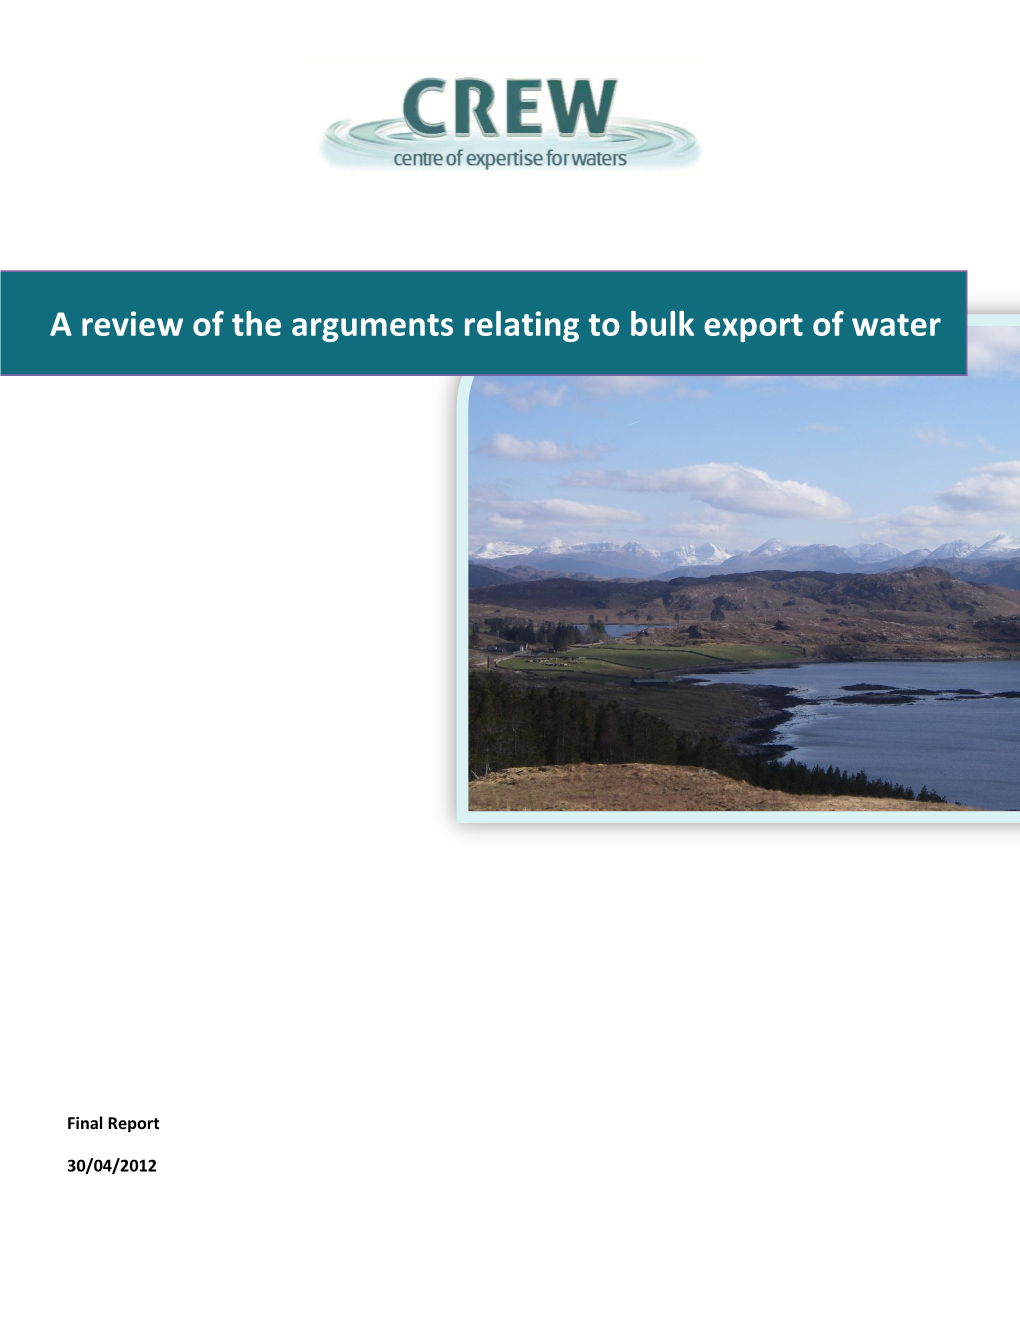 A Review of the Arguments Relating to Bulk Export of Water